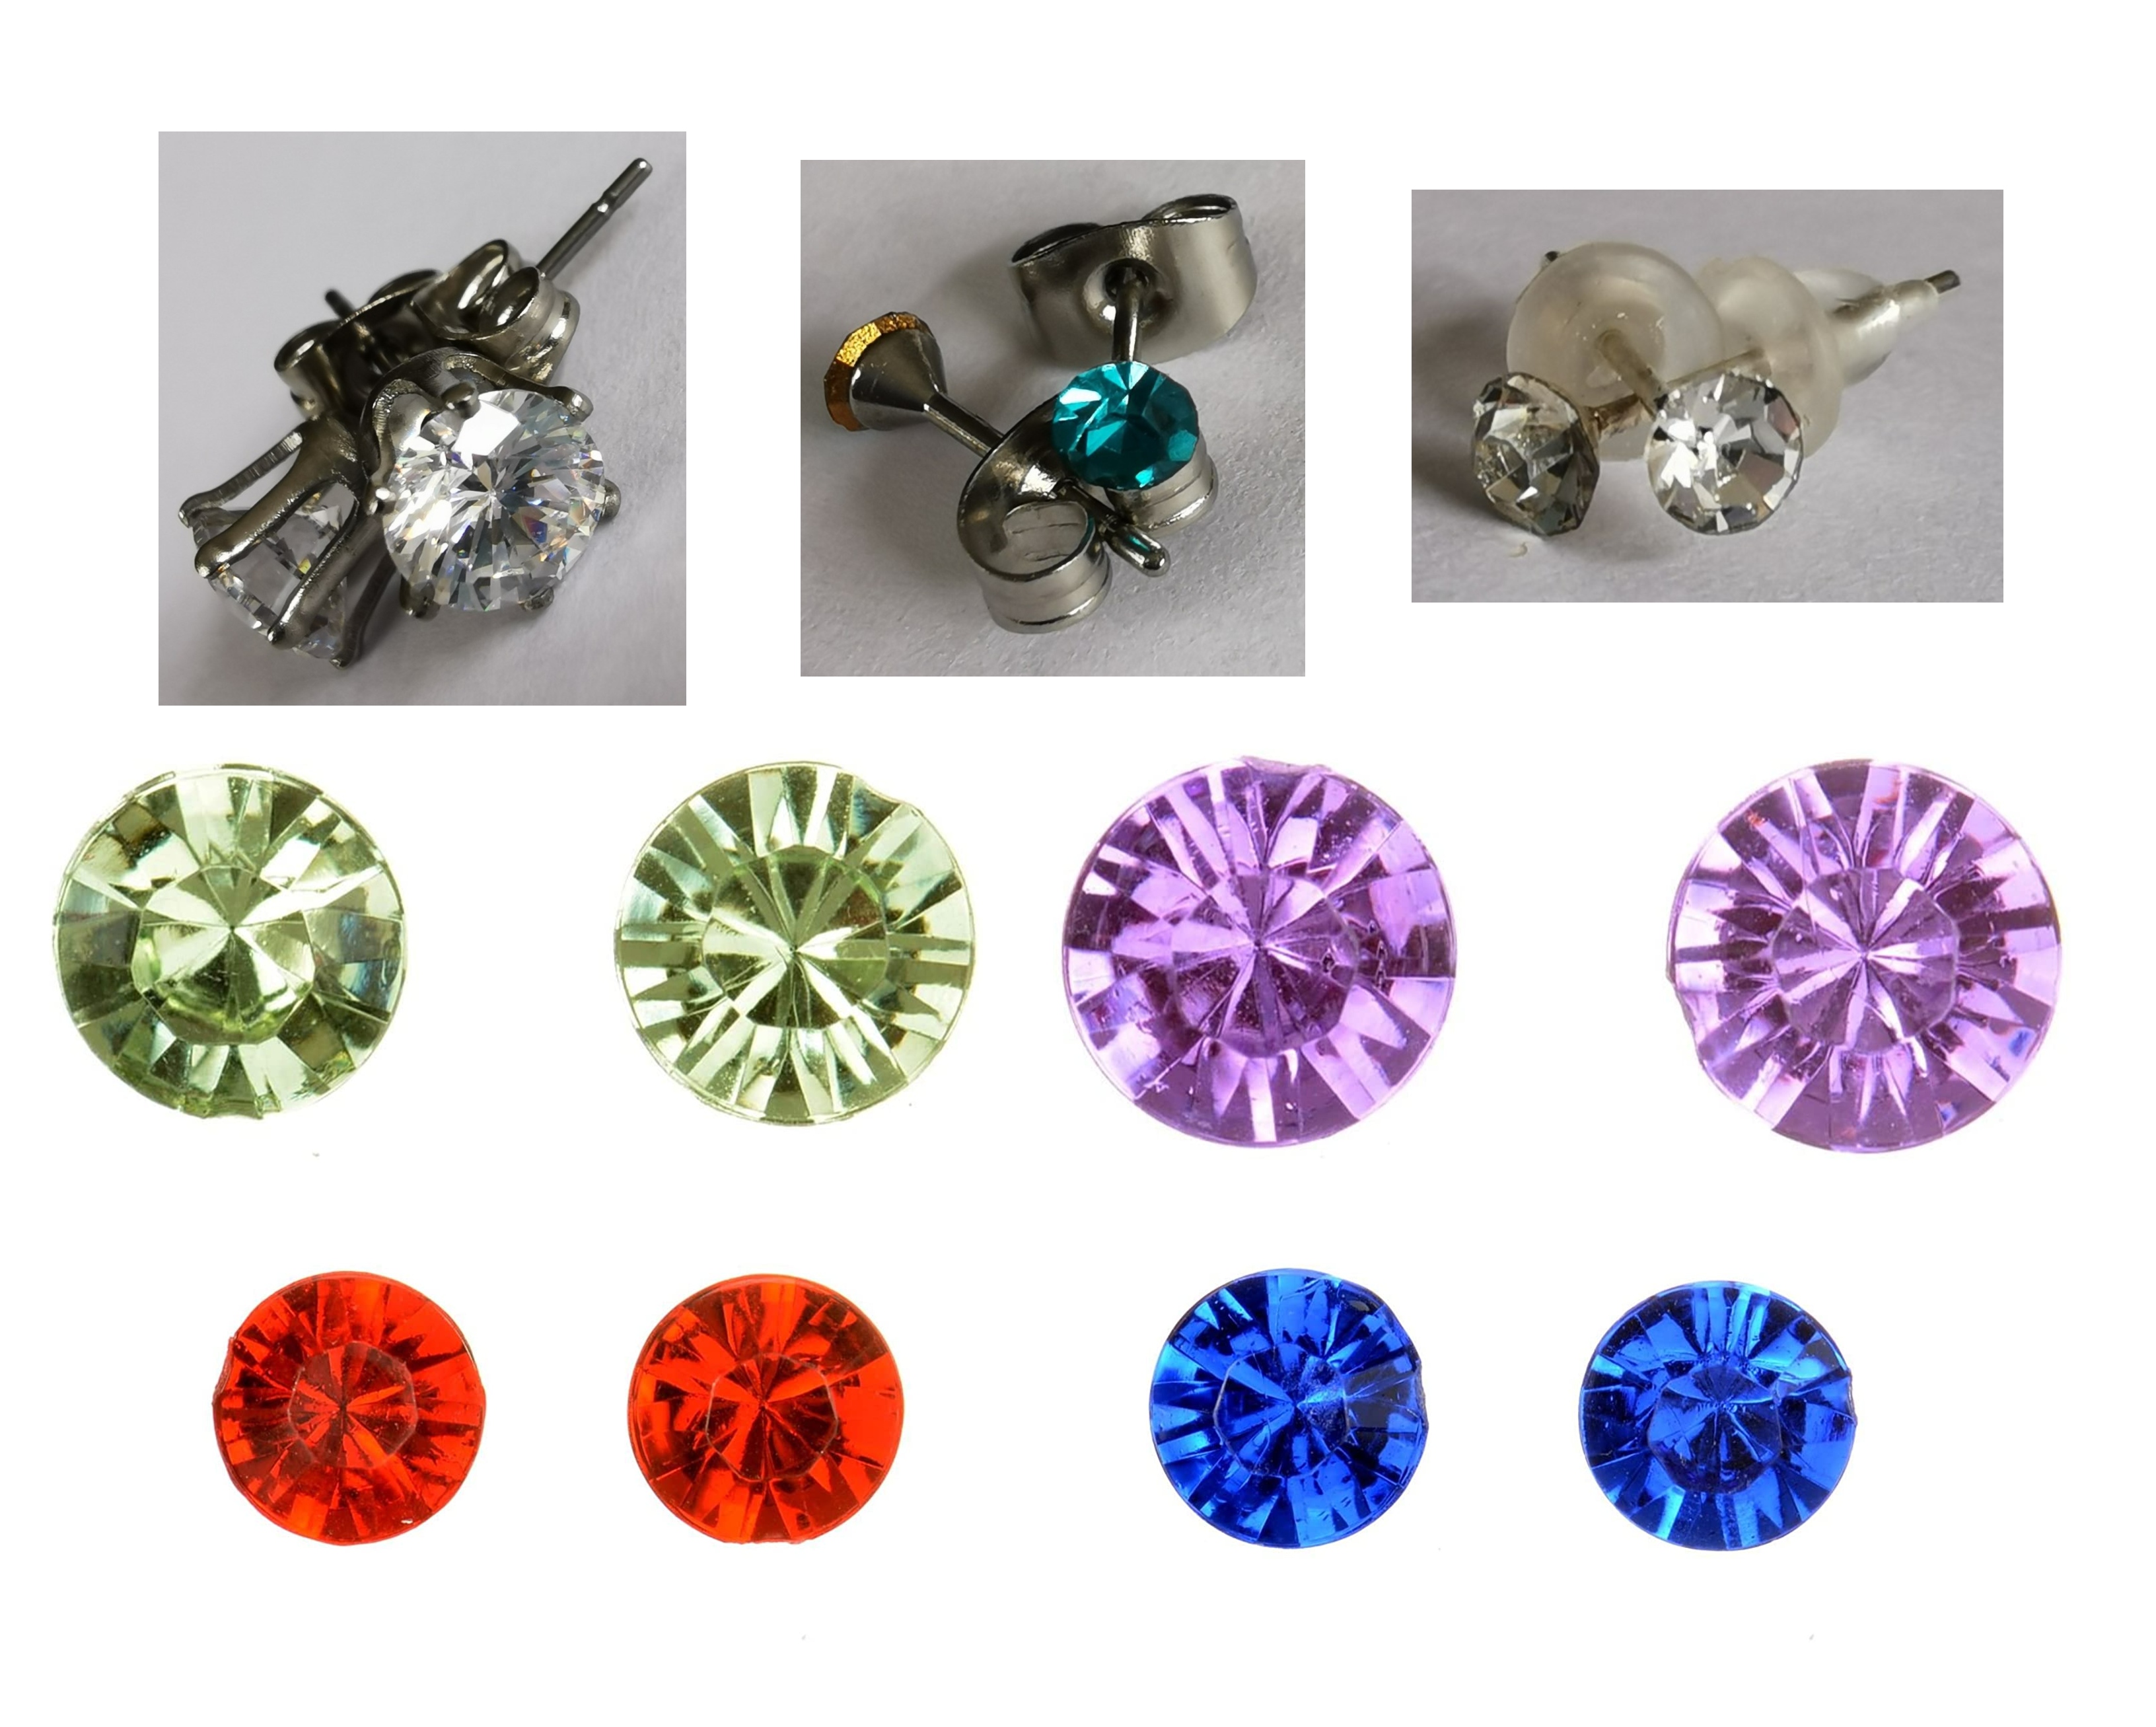 Wholesale Joblot Of 100 Solitaire Crystal Stud Stainless Steel Earrings Mixed Colours & Sizes